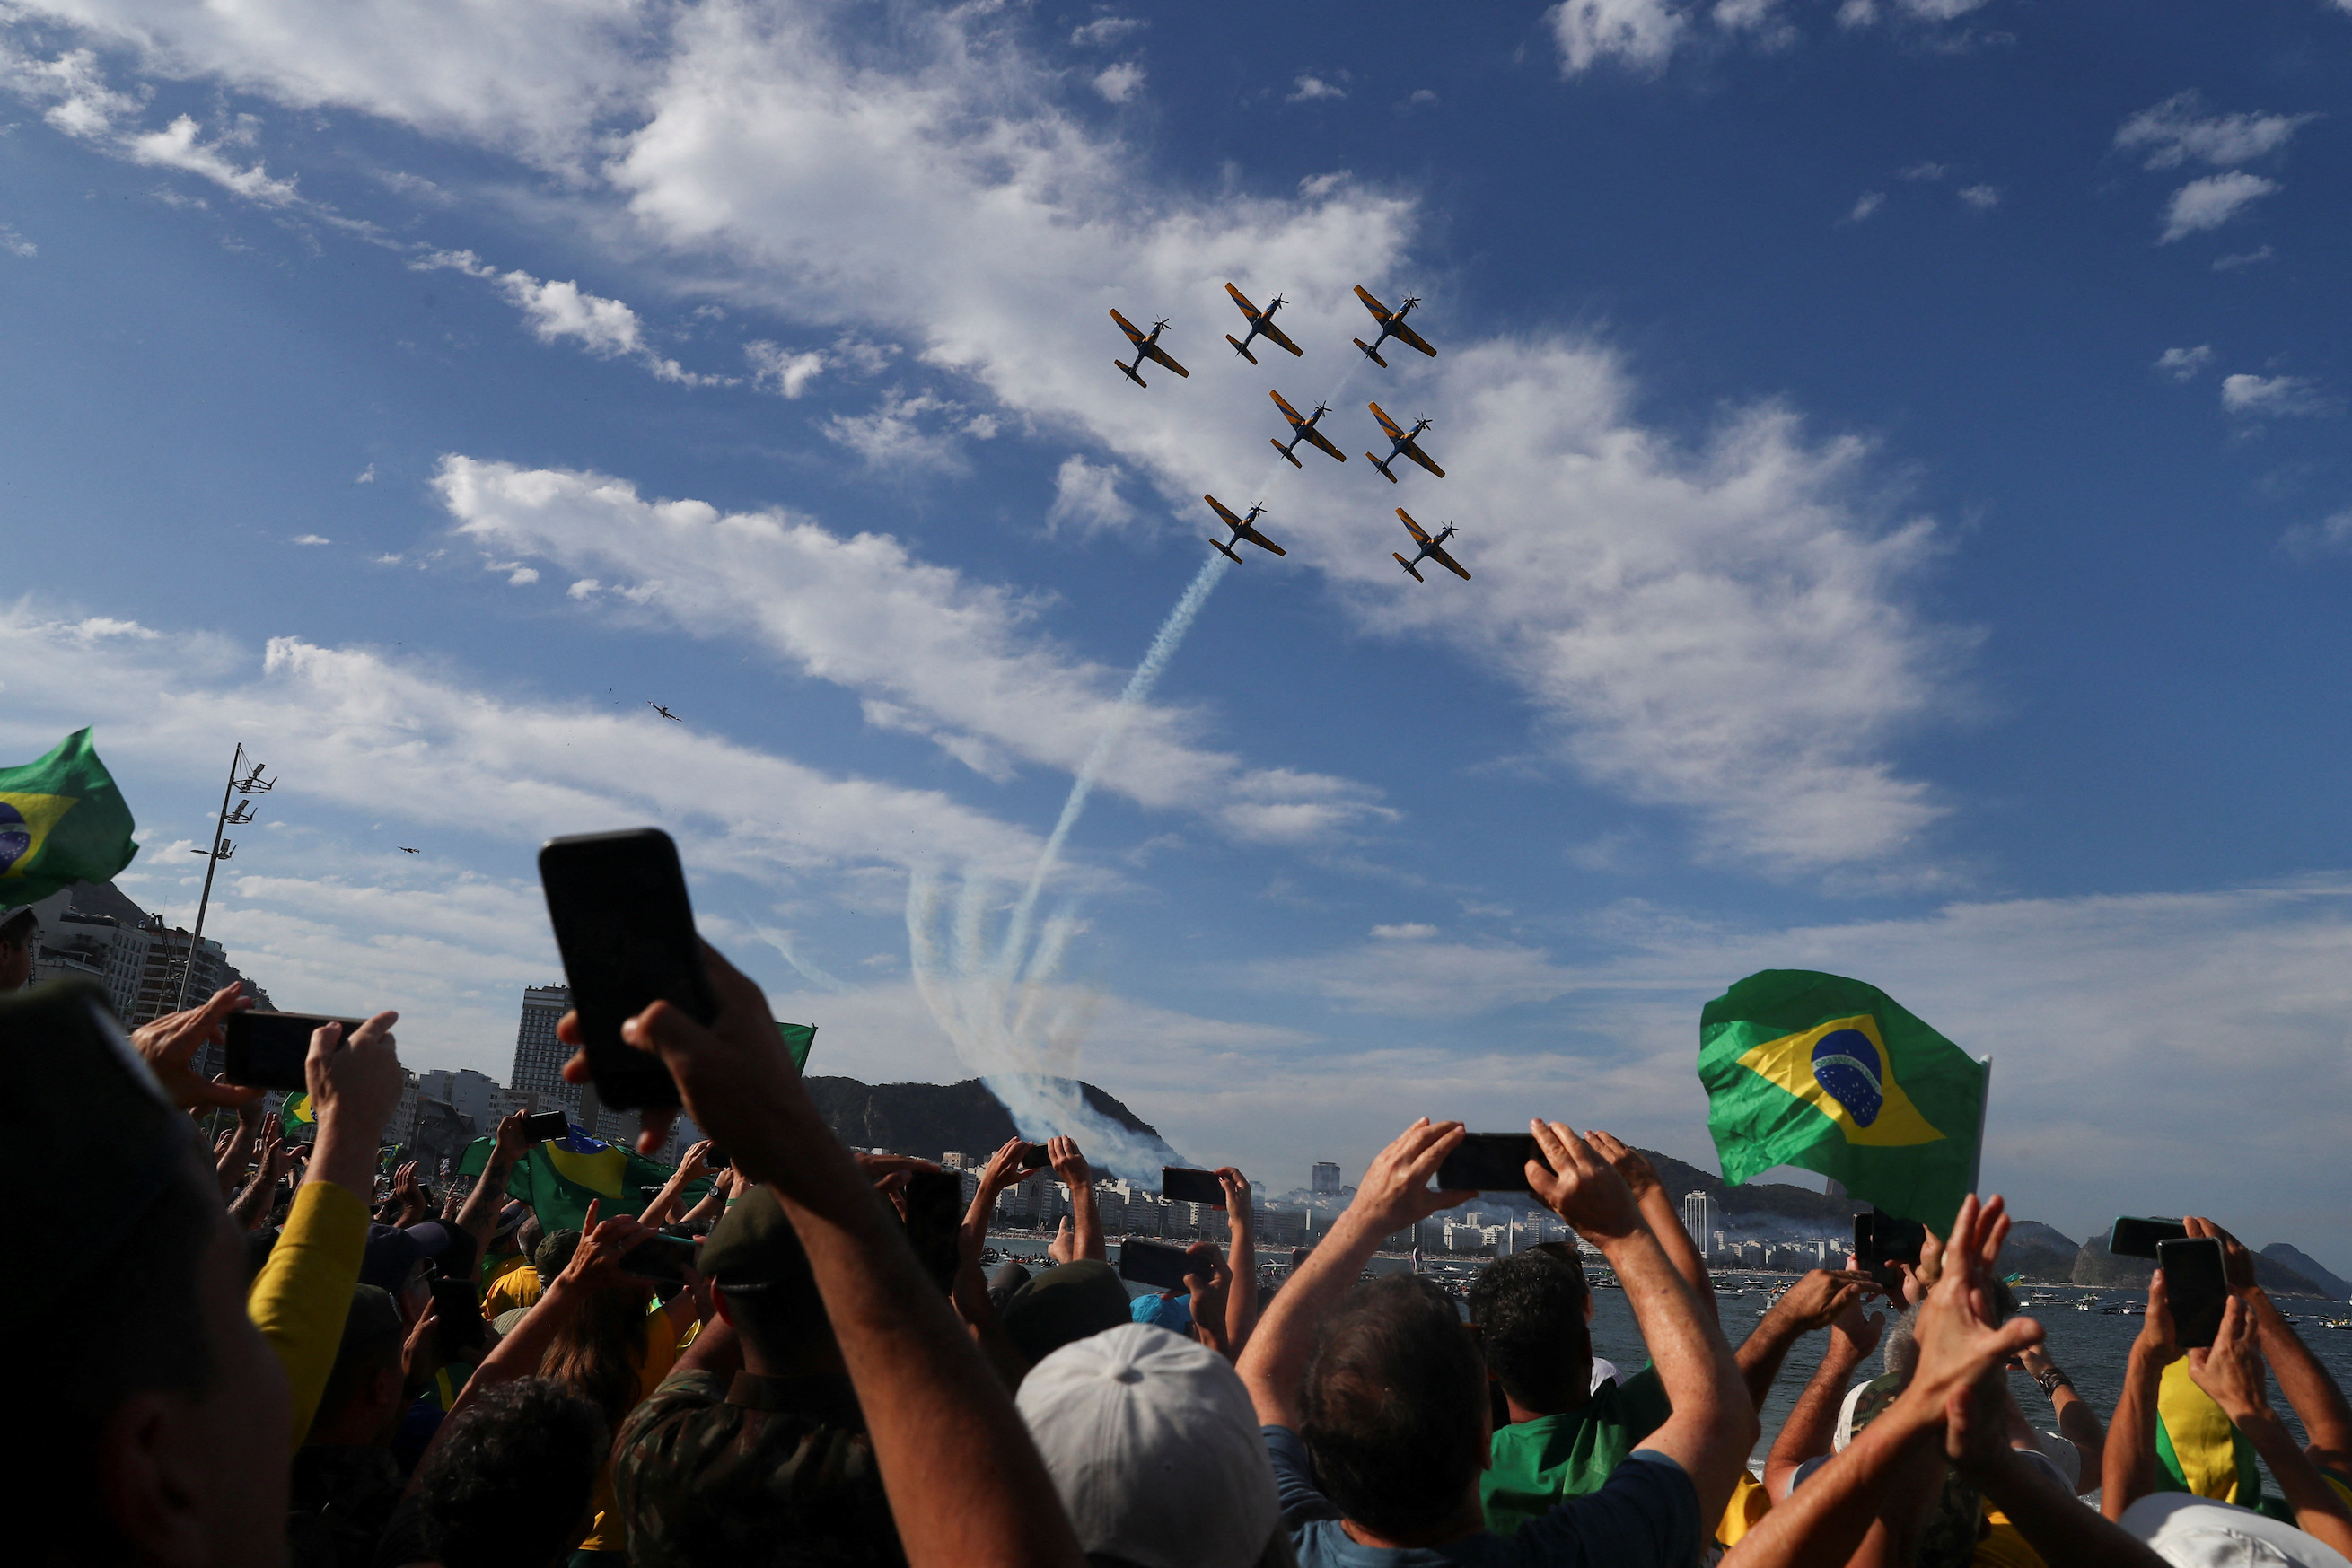 AMERICA/BRAZIL - Independence Day: seeing the many riches that